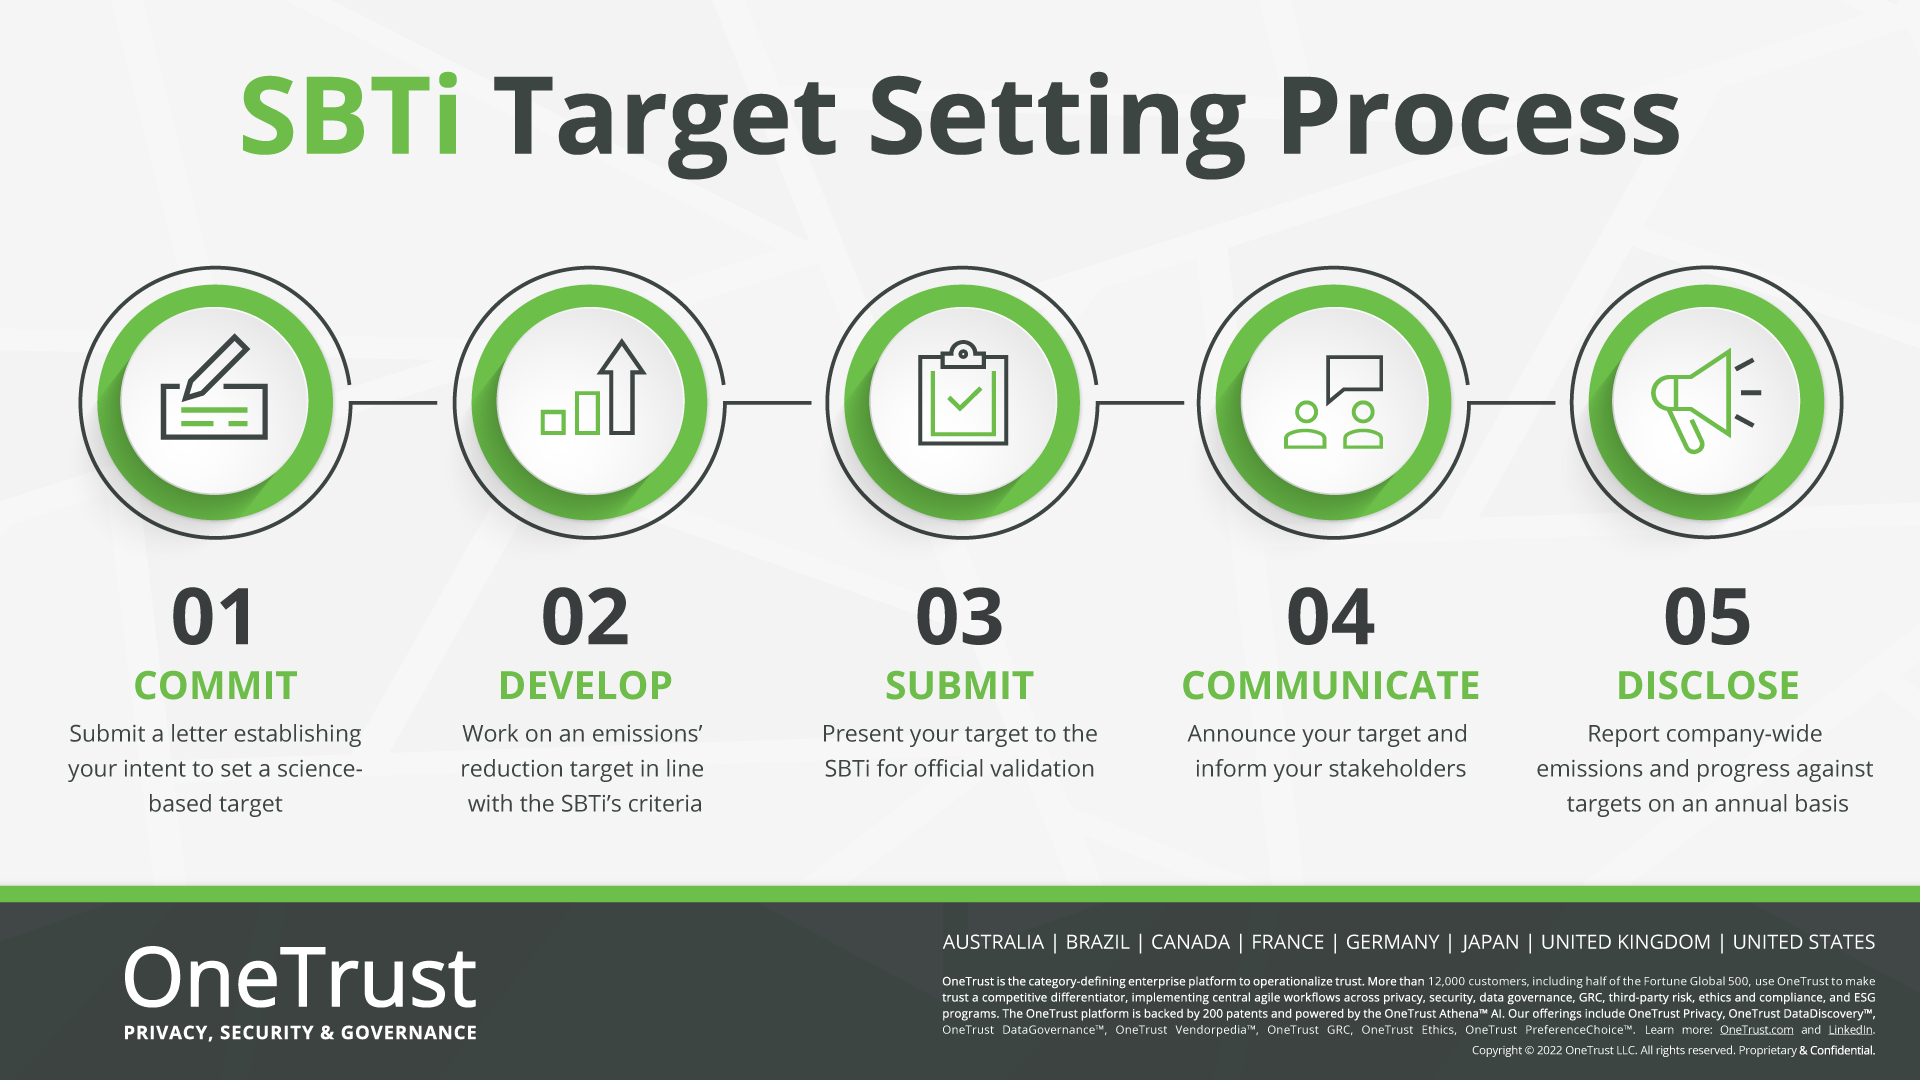 Infographic explaining the SBTi Target setting process and each stage of that